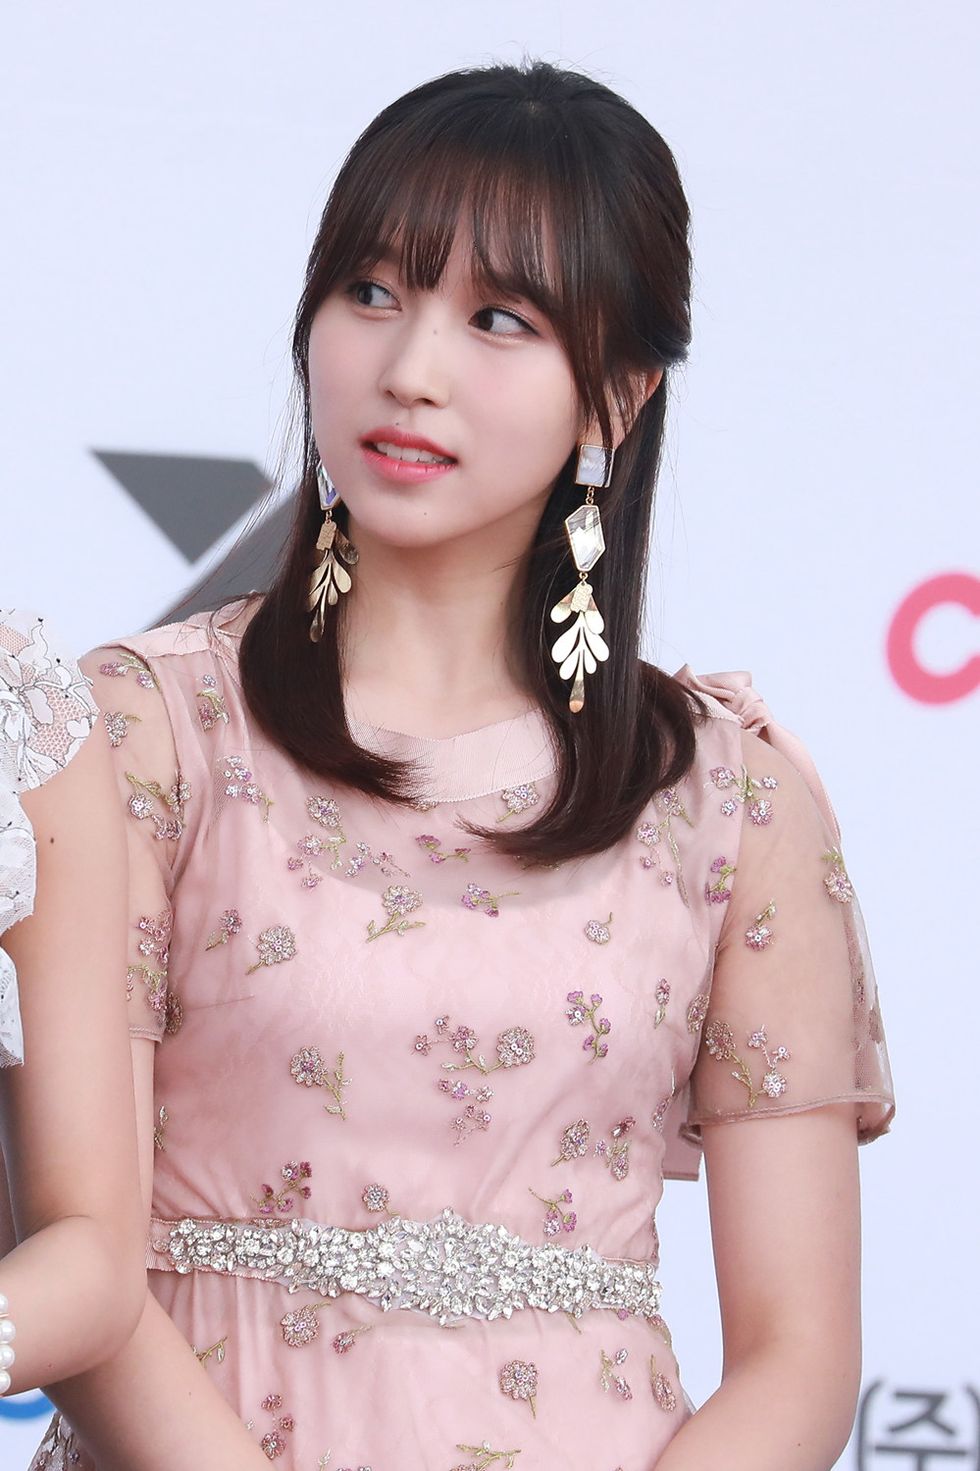 mina of south korean girl group twice attends the 2018 soribada best k music awards in seoul, south korea, 30 august 2018